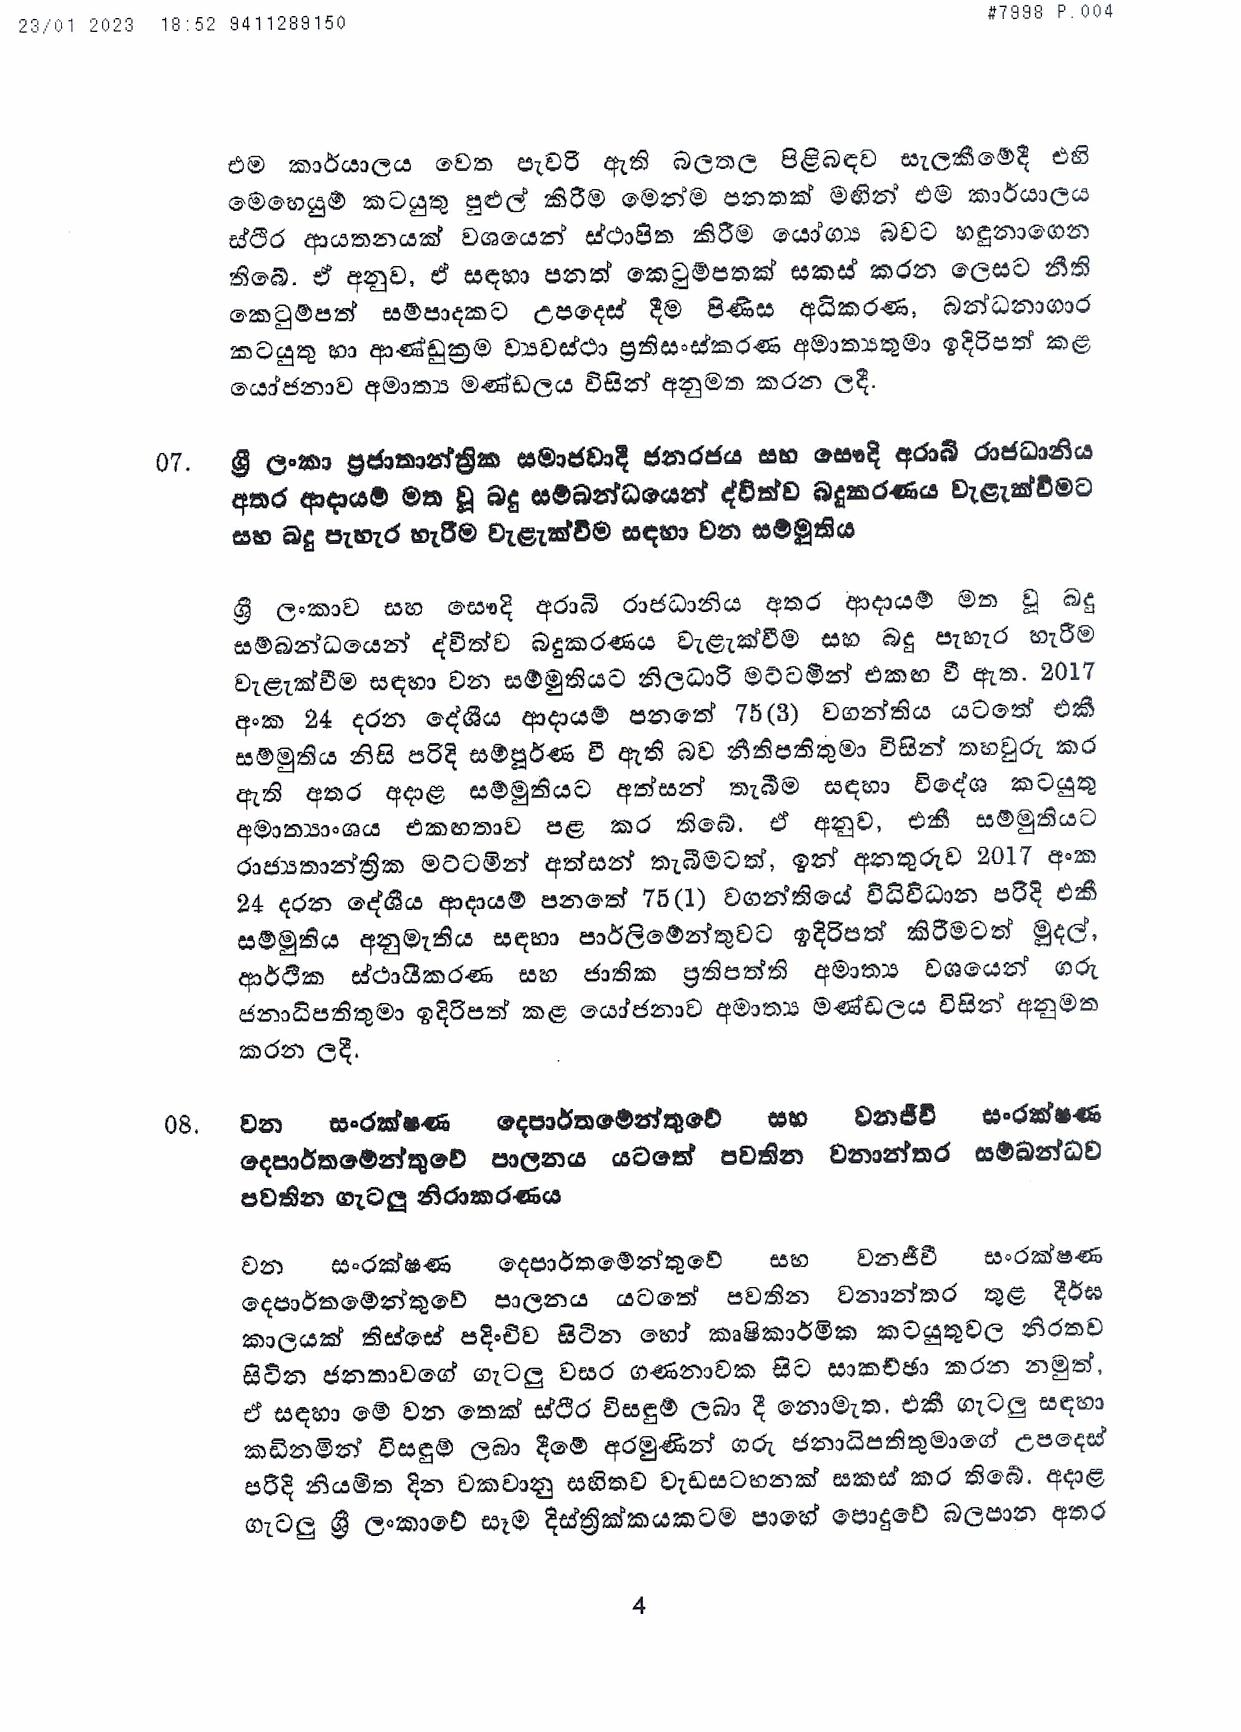 Cabinet Decision on 23.01.2023 page 004